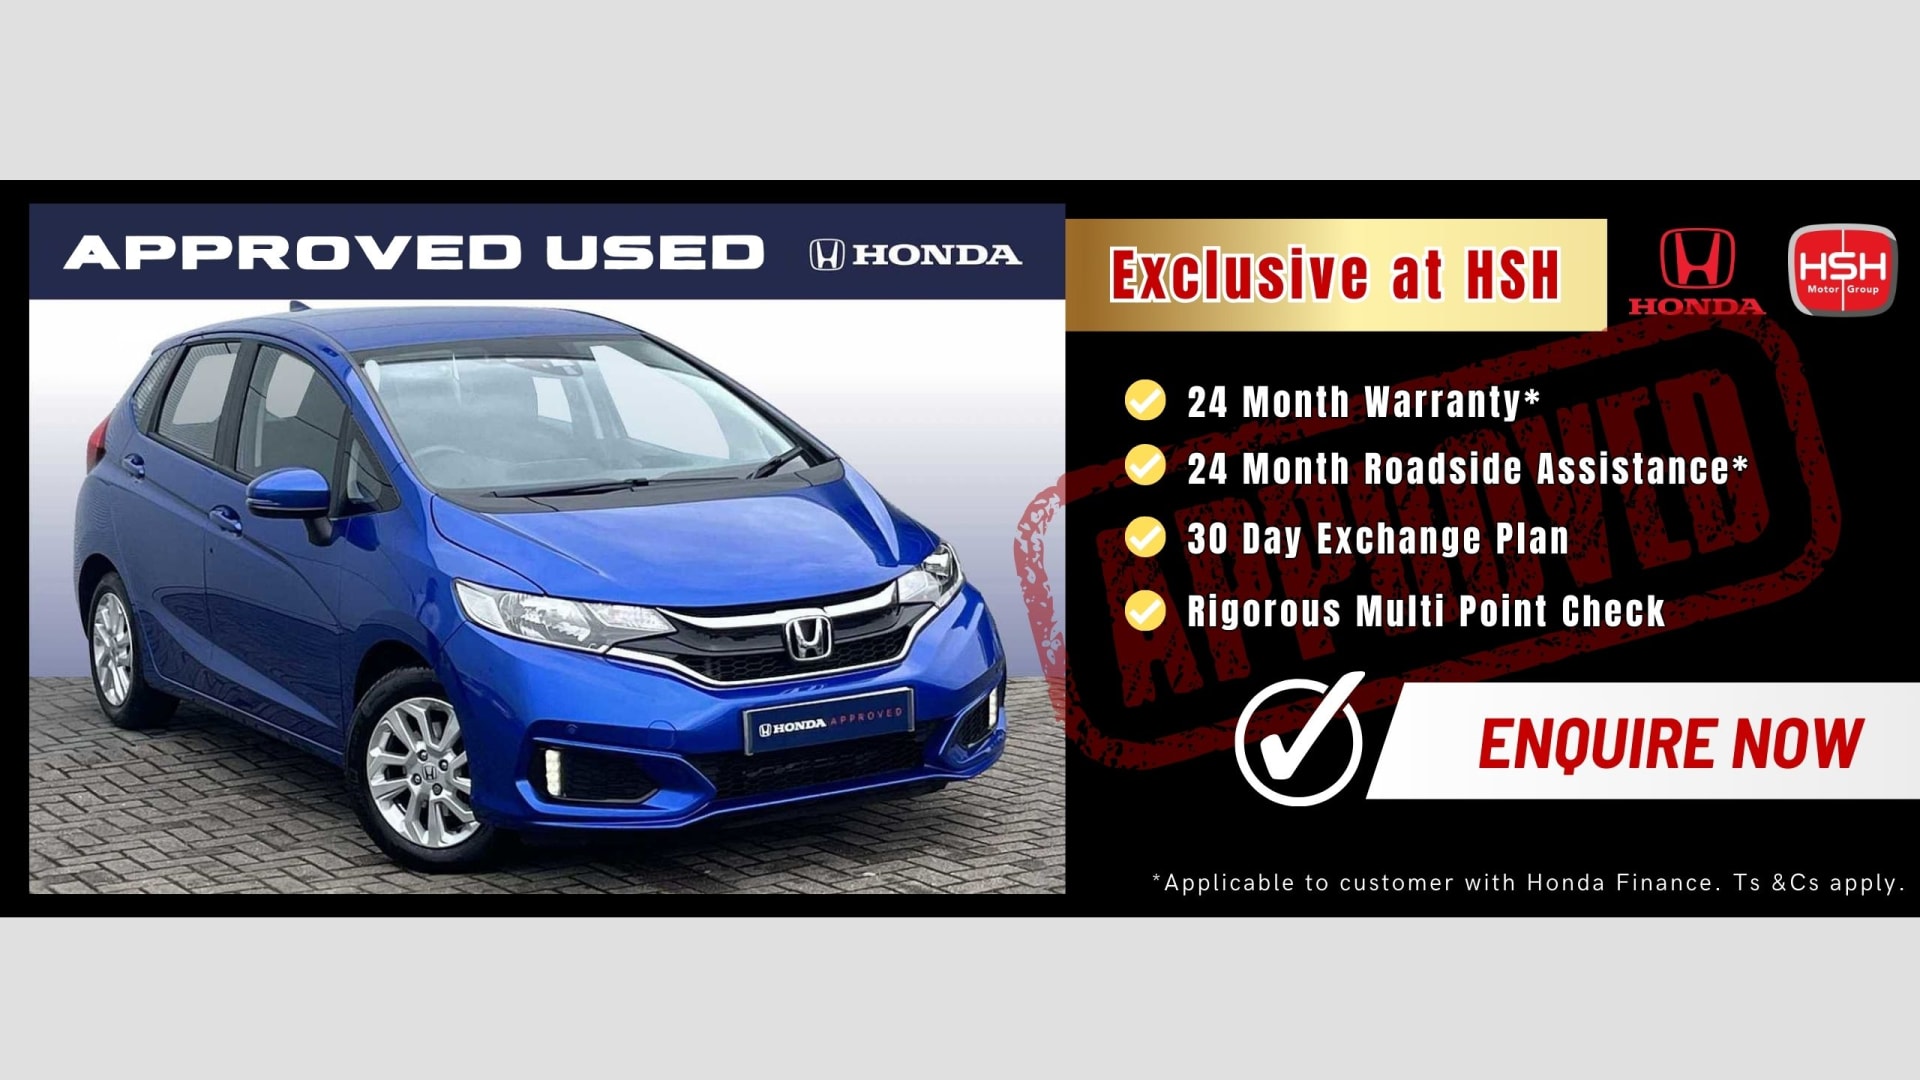 Approved Used Honda Car Exclusive Benefits